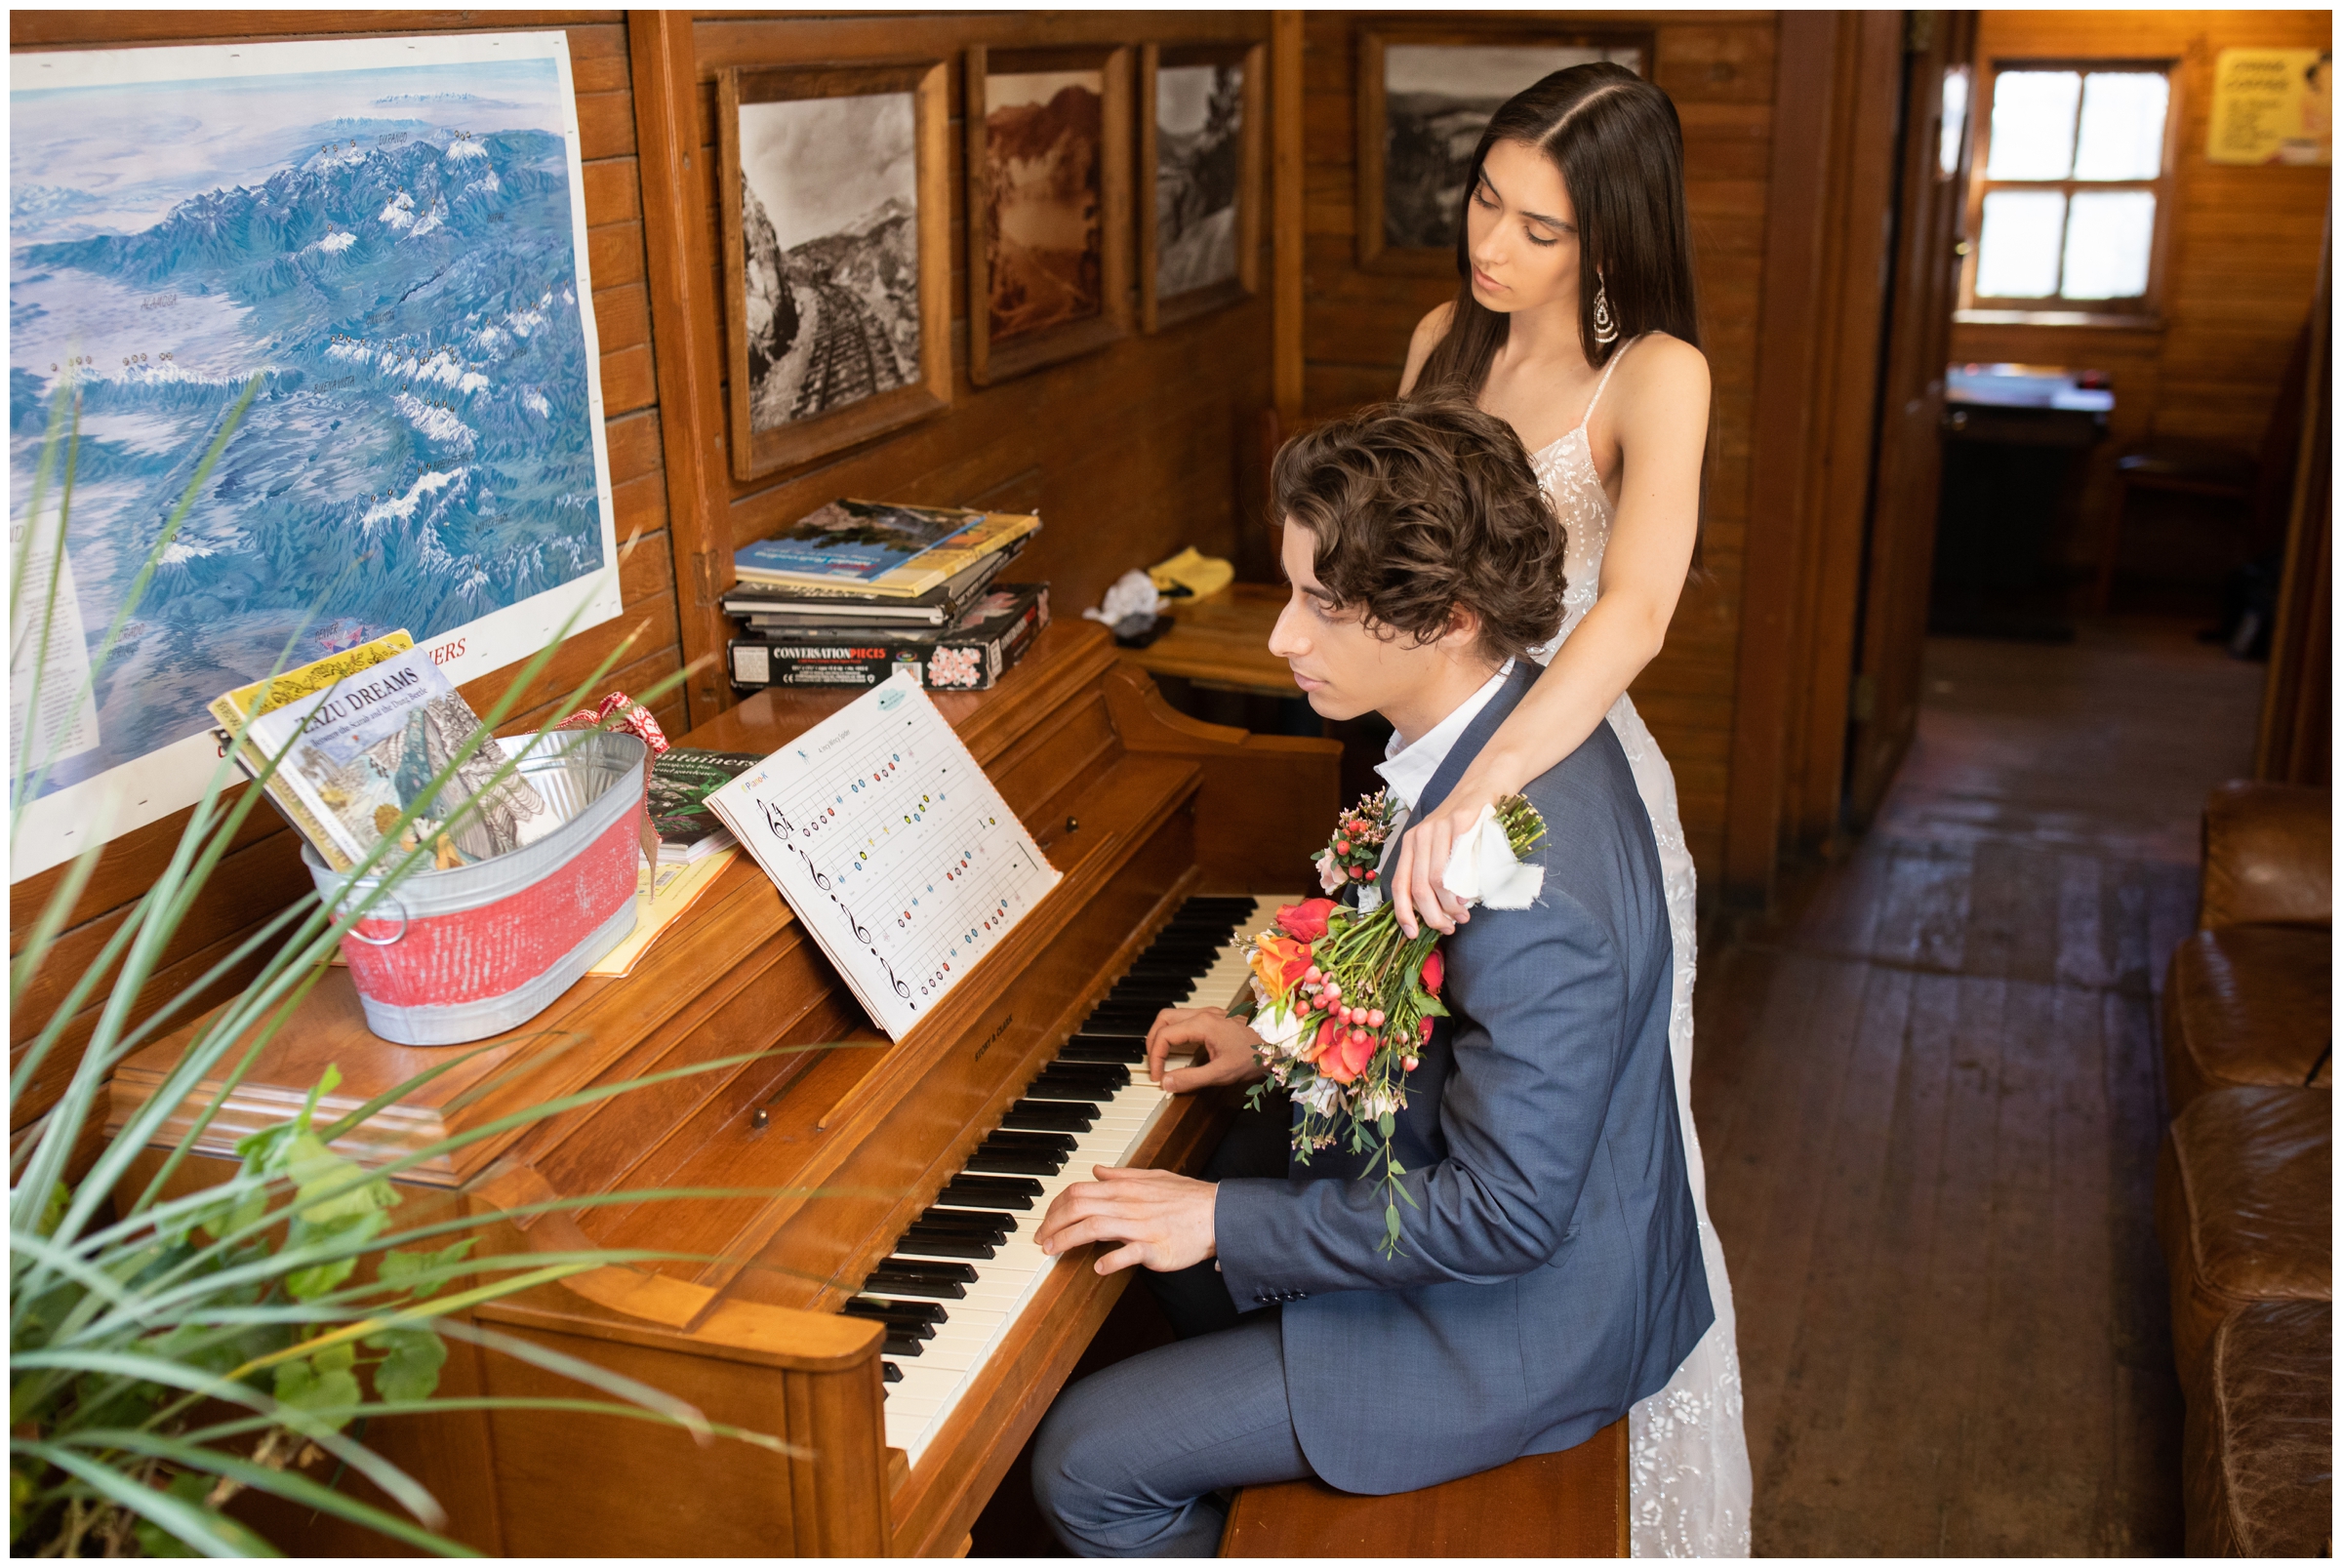 Unique Colorado elopement photos at The Train Cars Coffee by wedding photographer Plum Pretty Photography